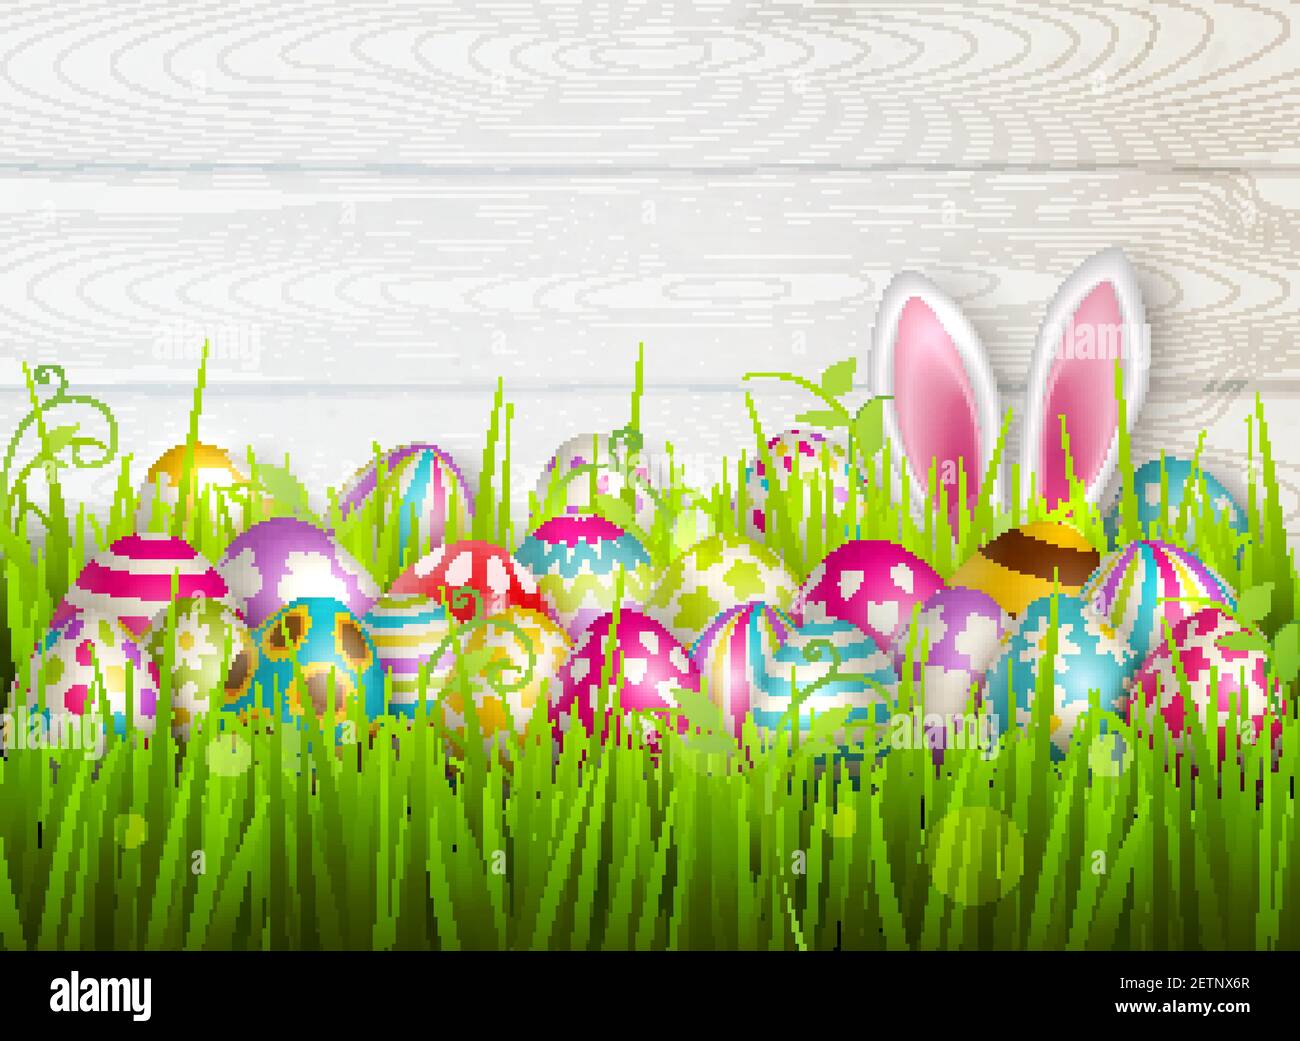 Easter composition with colourful images of festive easter eggs on green grass surface with bunny ears vector illustration Stock Vector